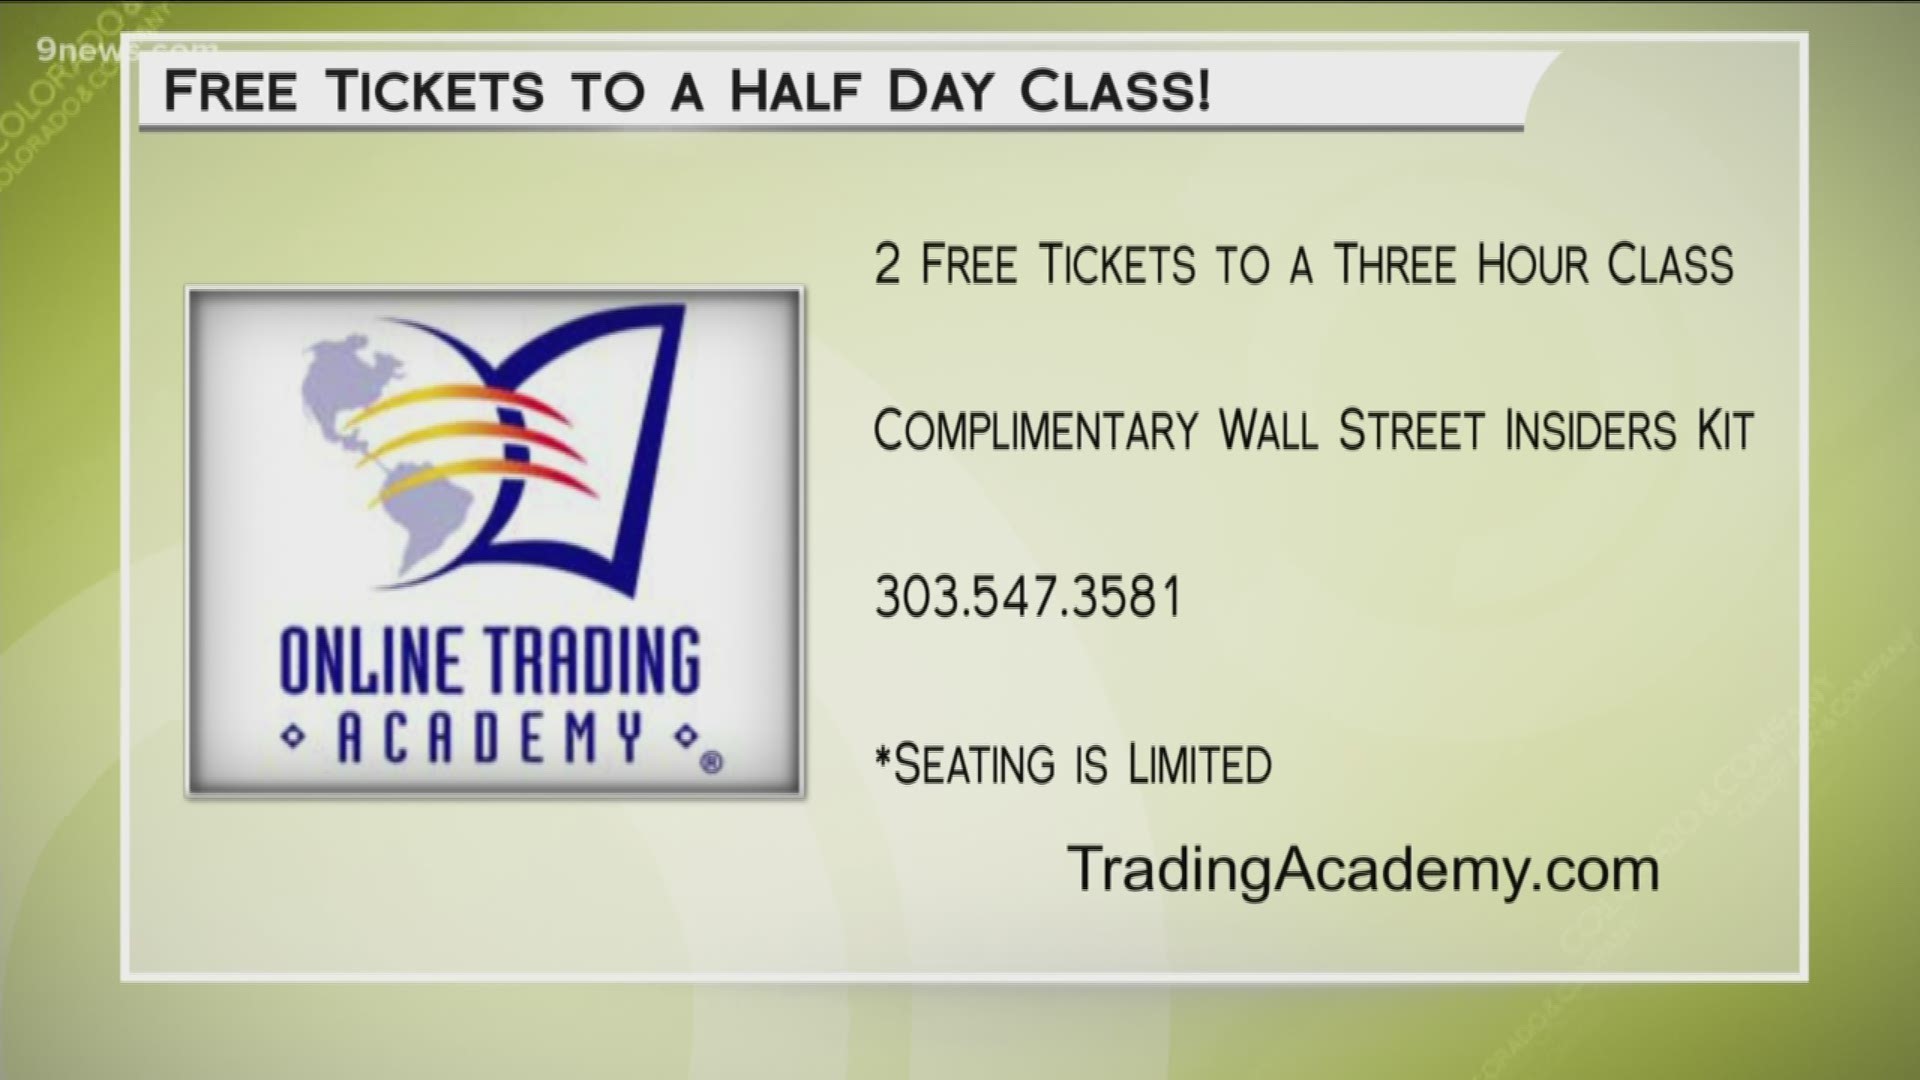 Invest and trade like the pros with Online Trading Academy. Call 303.547.3581 for two free tickets to a three-hour class. Learn more at www.TradingAcademy.com.